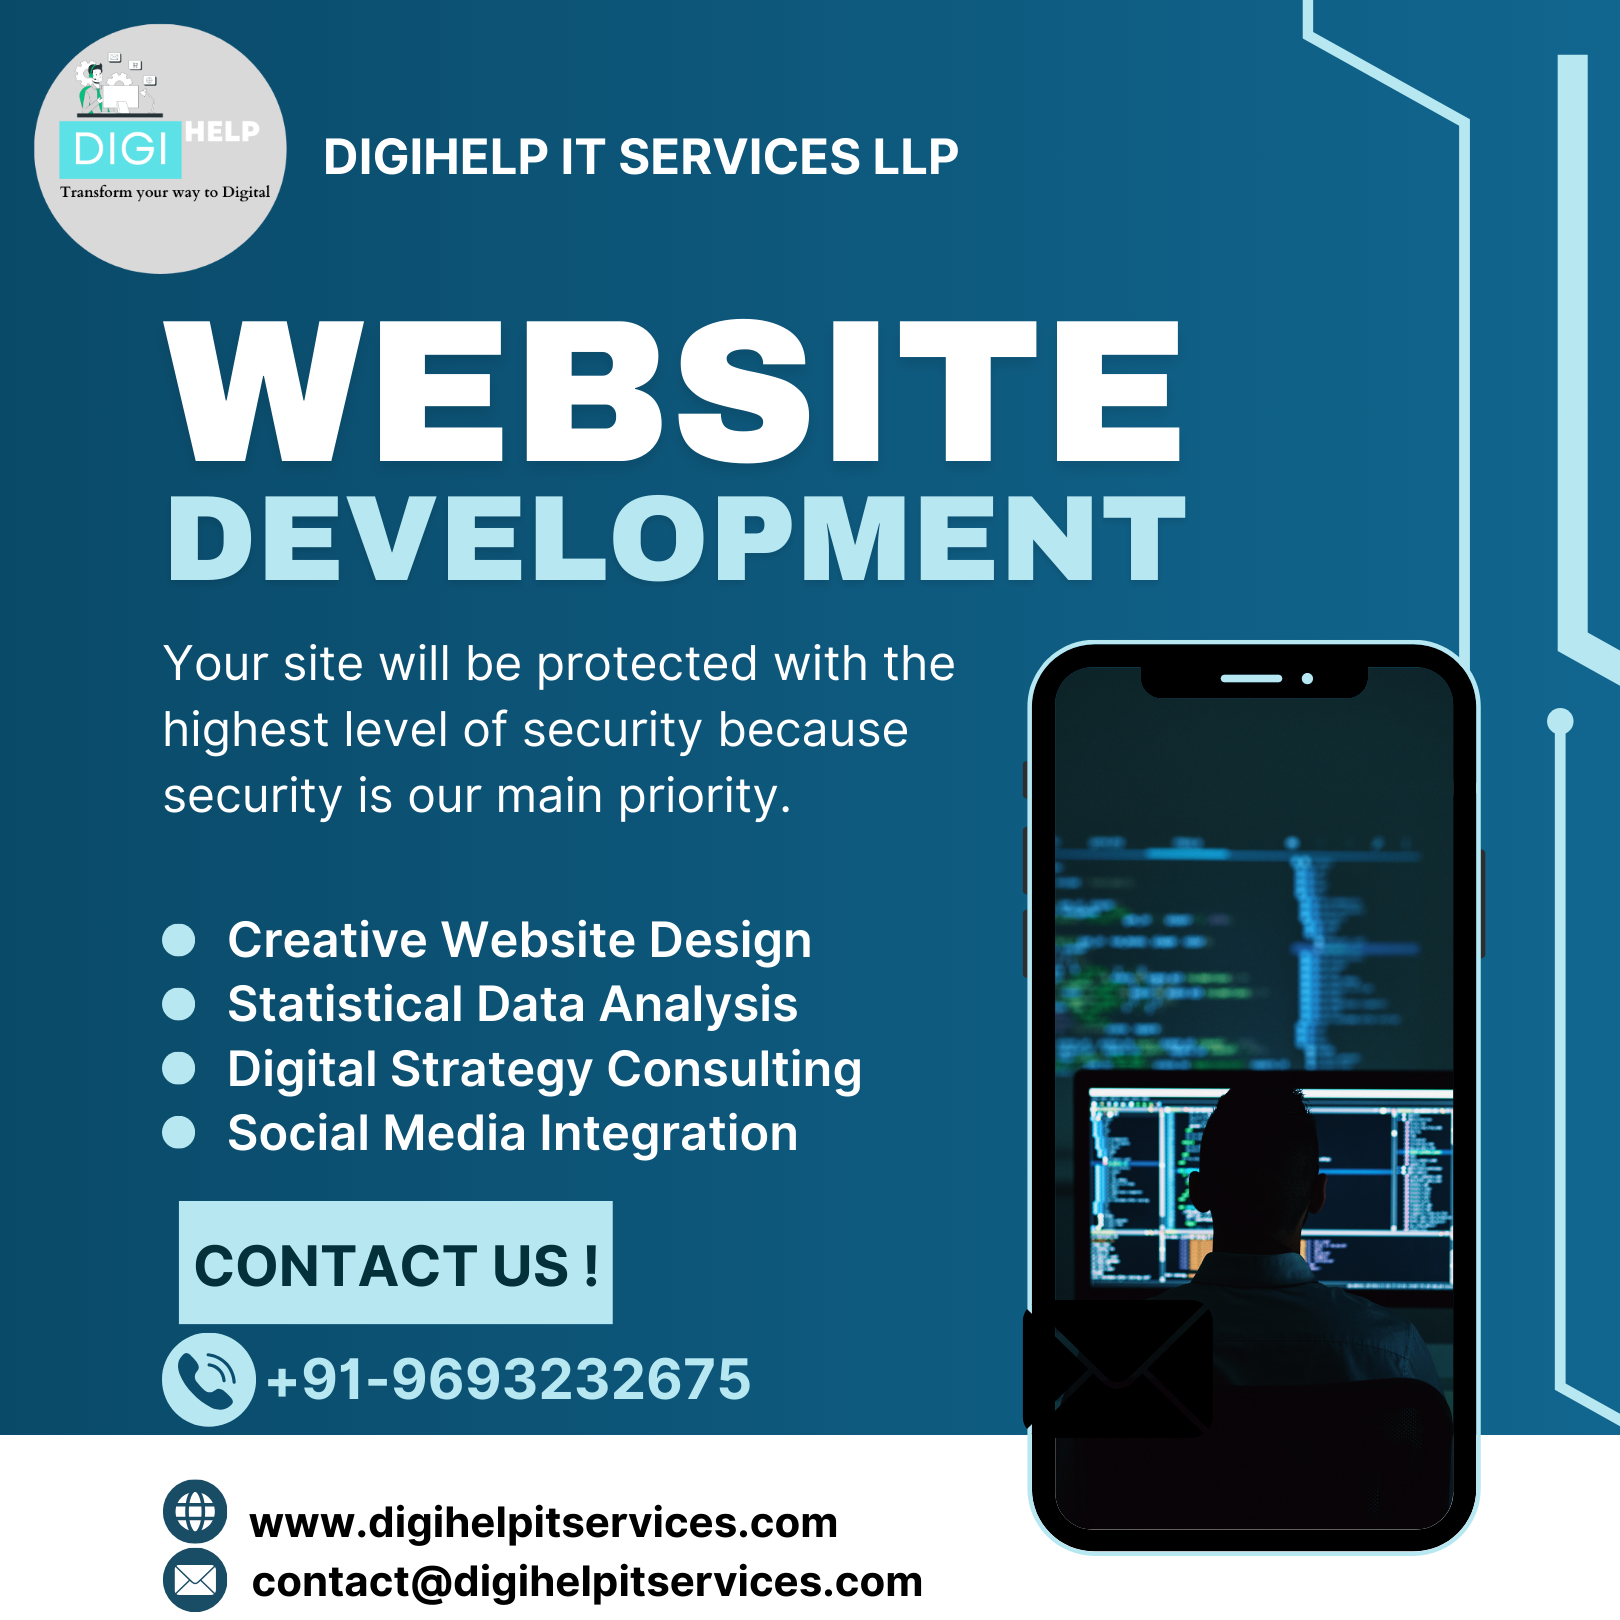 dynamic website, content generation, user interaction, database integration, personalization, interactivity, content management systems (CMS), e-commerce functionality, user authentication,